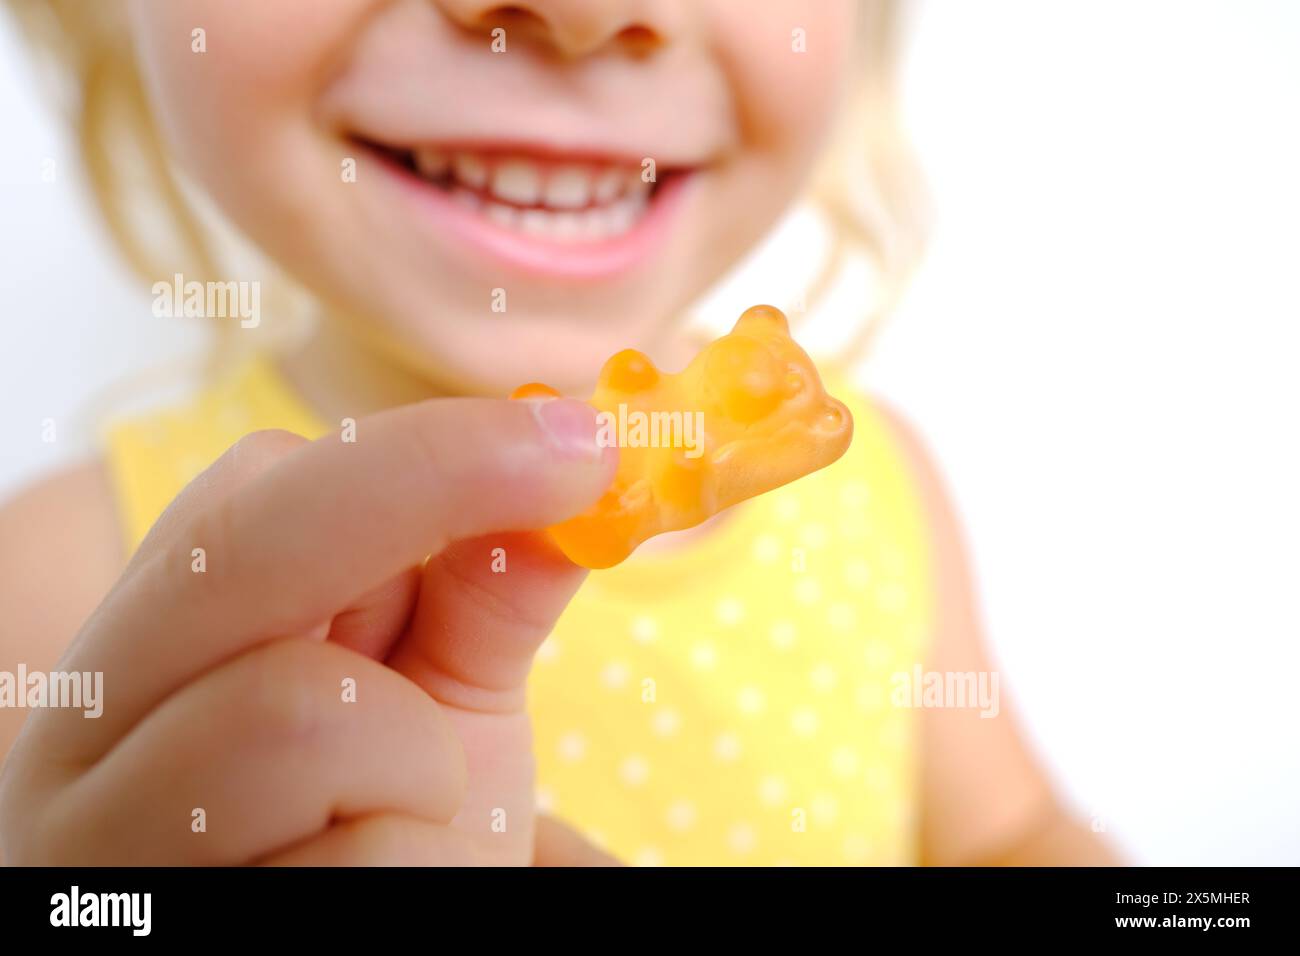 cheerful small child holds sweets, blonde girl 3 years old wants eat gelatinous candy with smile, gummy bear, kid has good appetite, happy childhood, Stock Photo